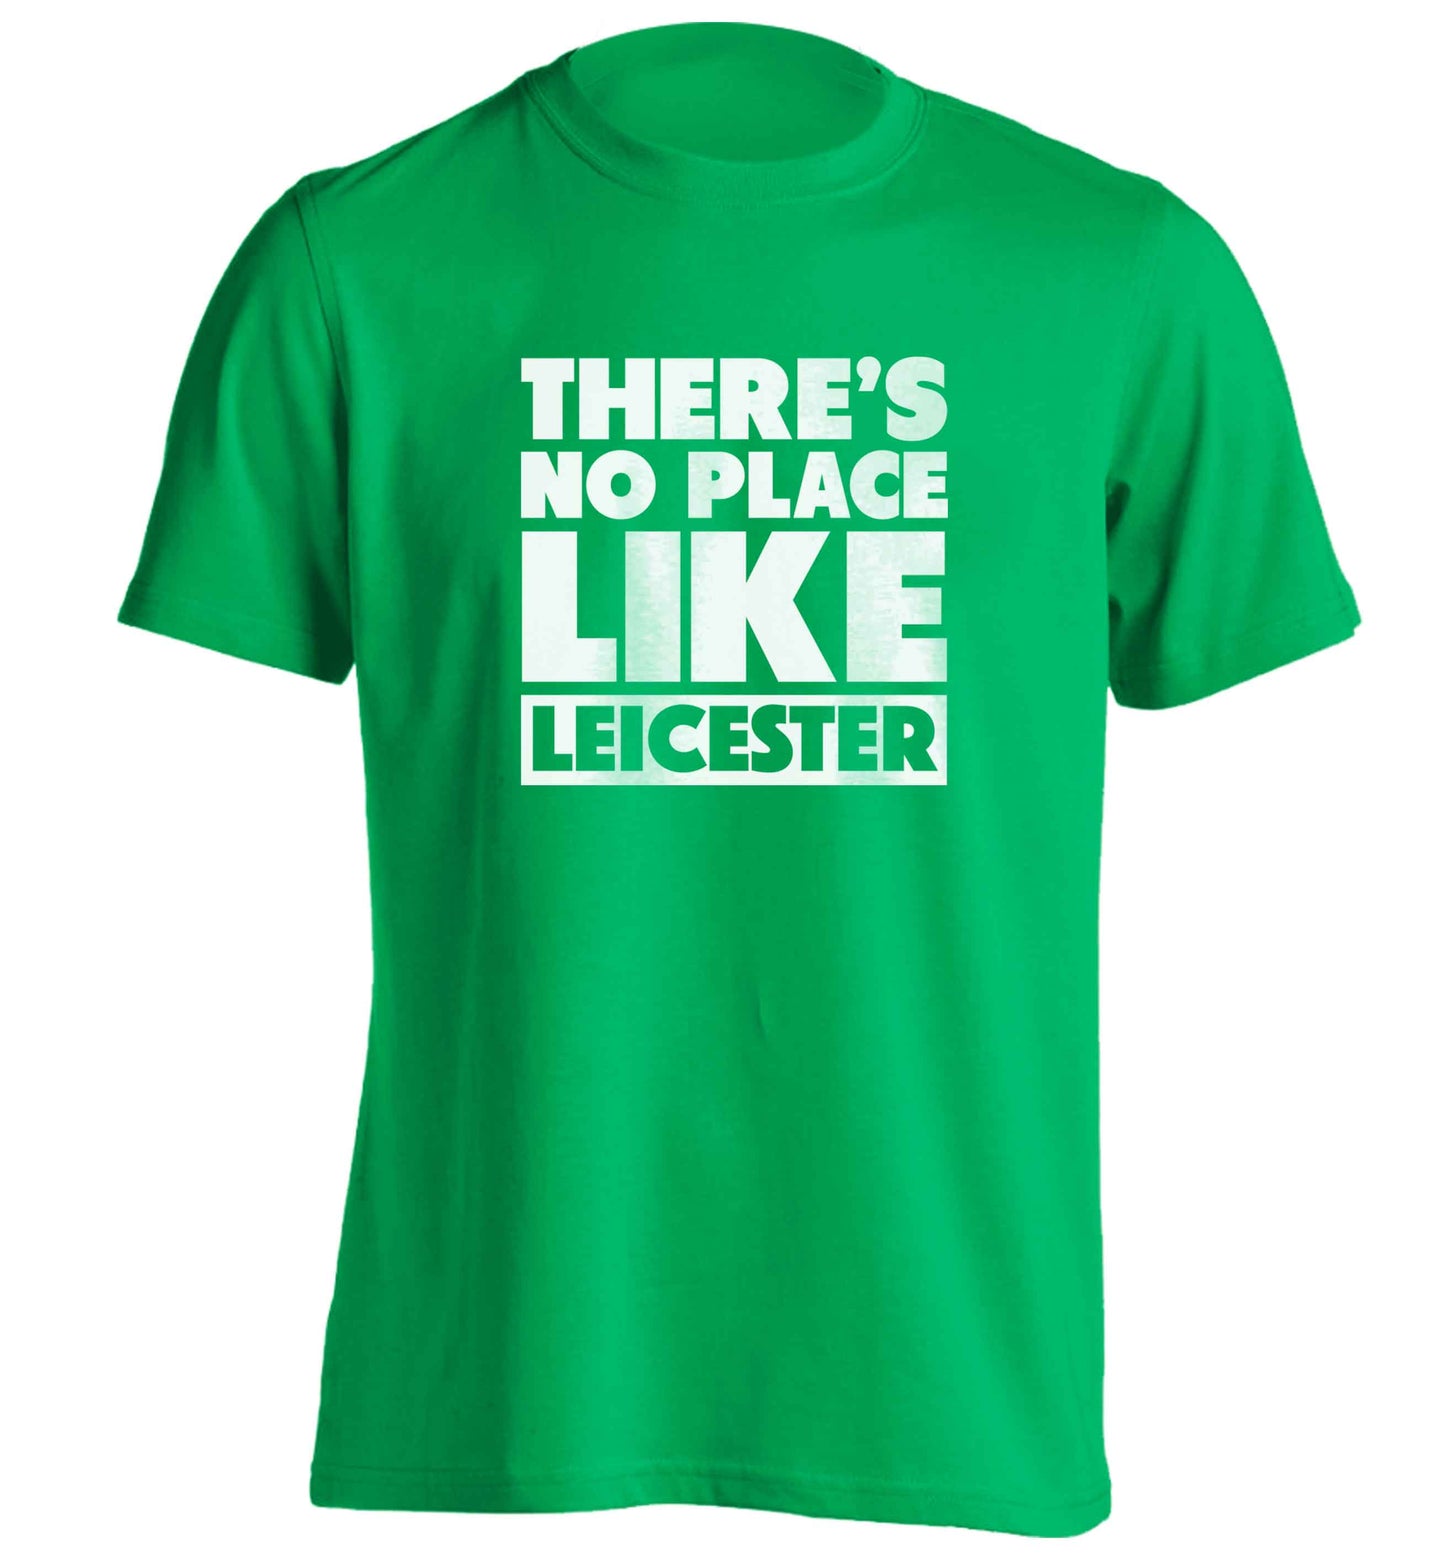 There's no place like Leicester adults unisex green Tshirt 2XL